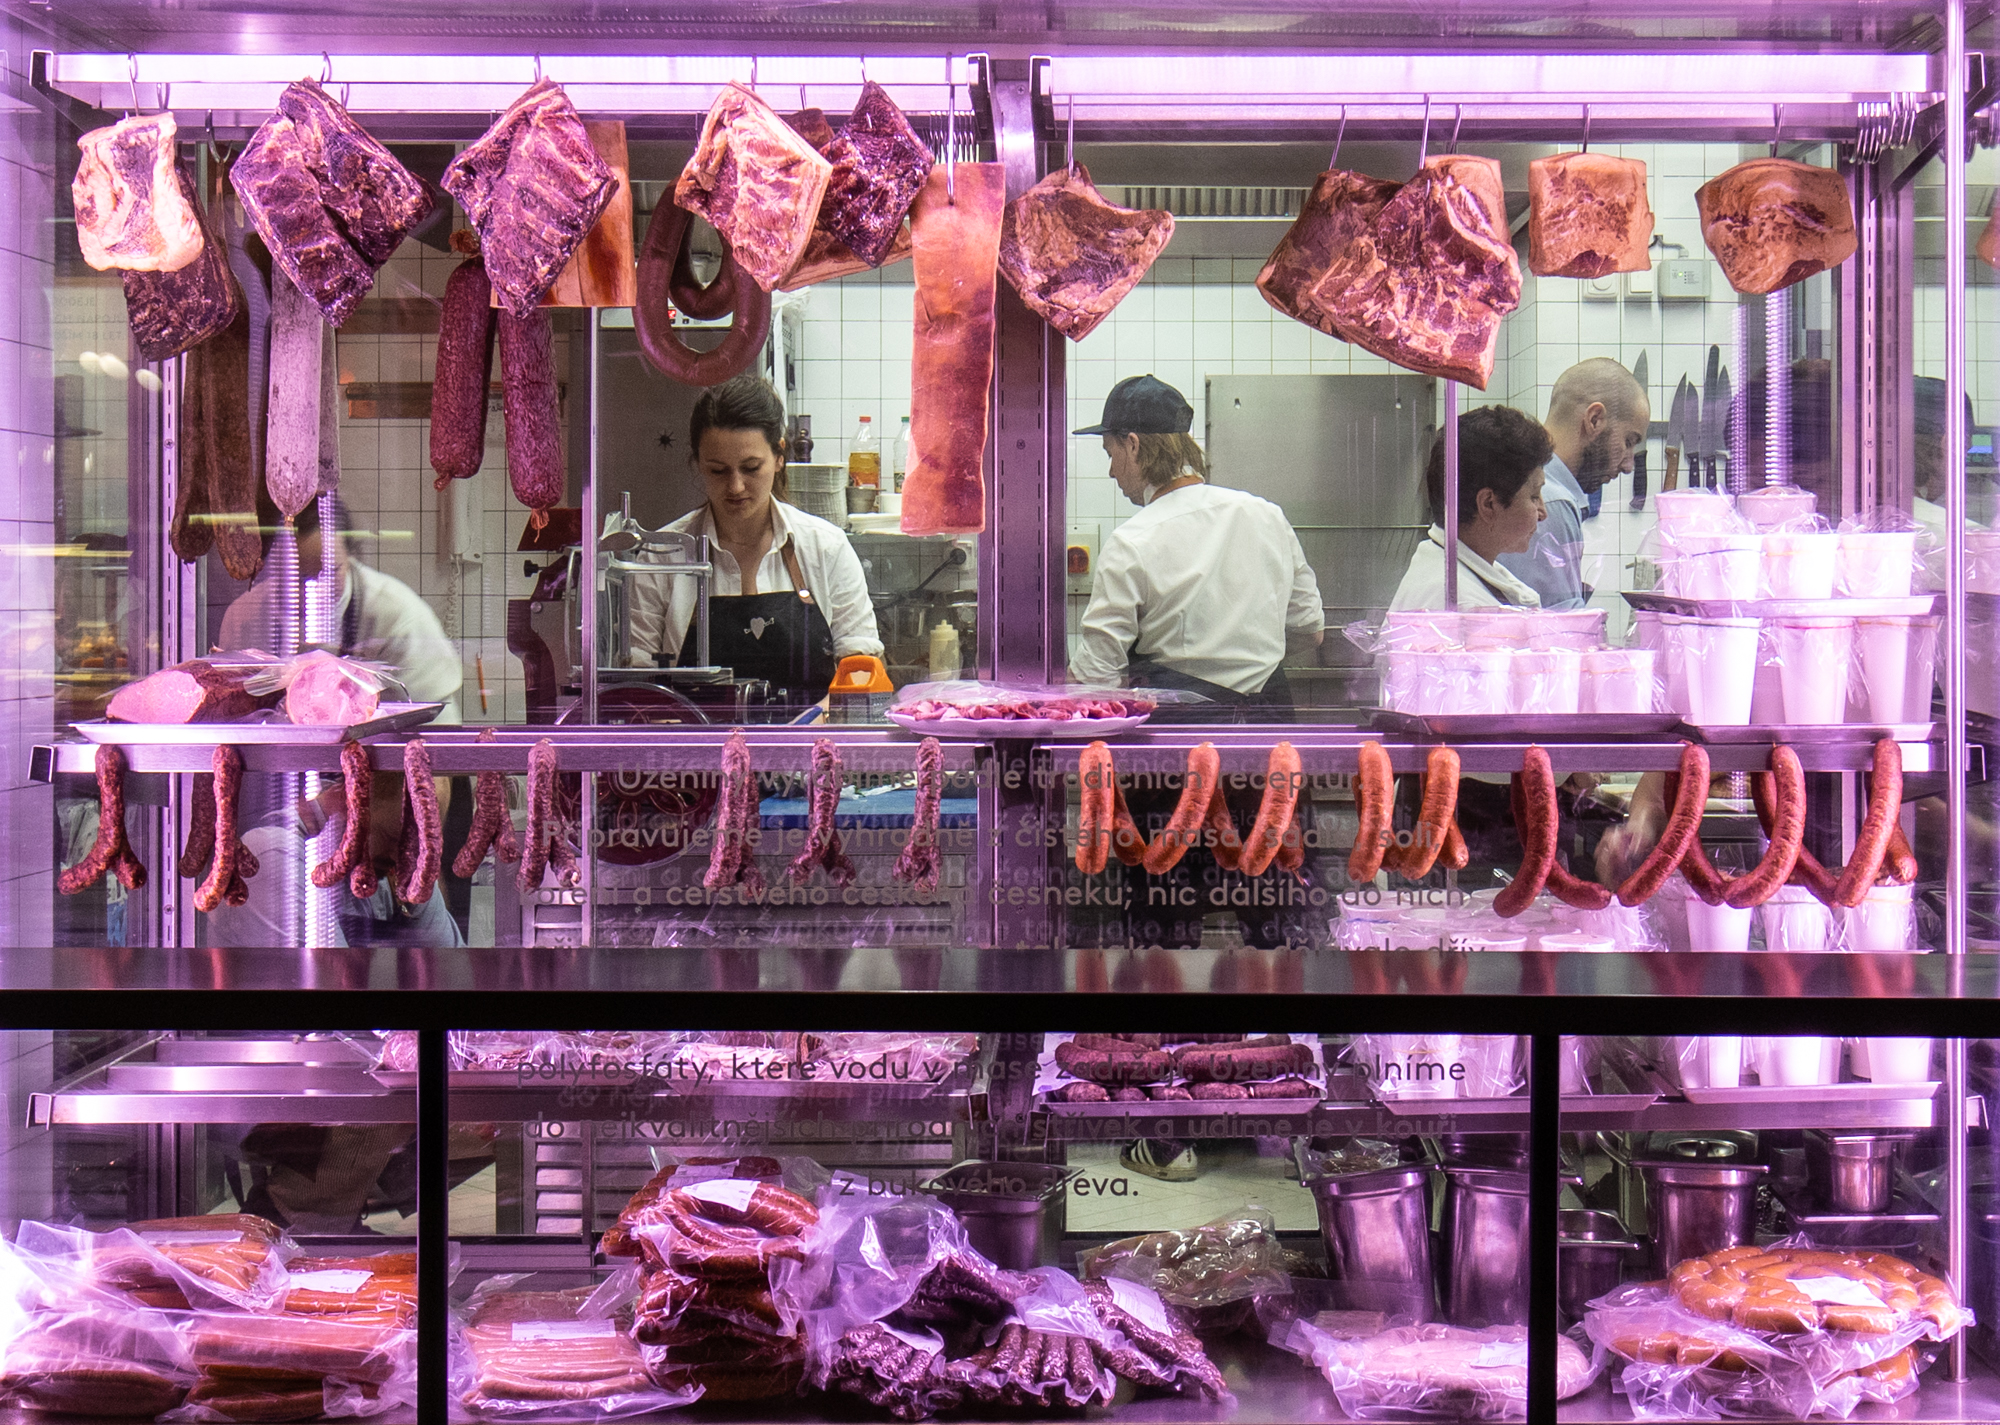 The window display and butchers at work at Naše maso in Prague